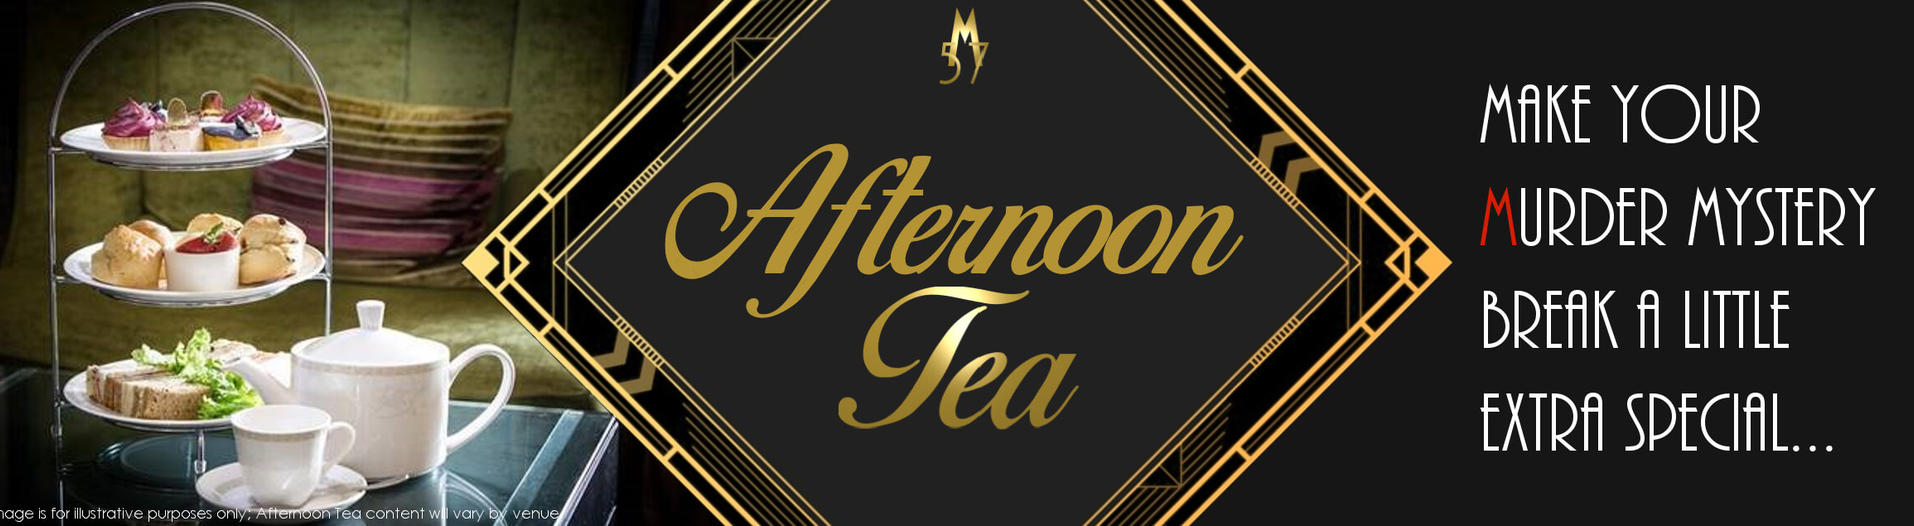 Afternoon Tea Offers